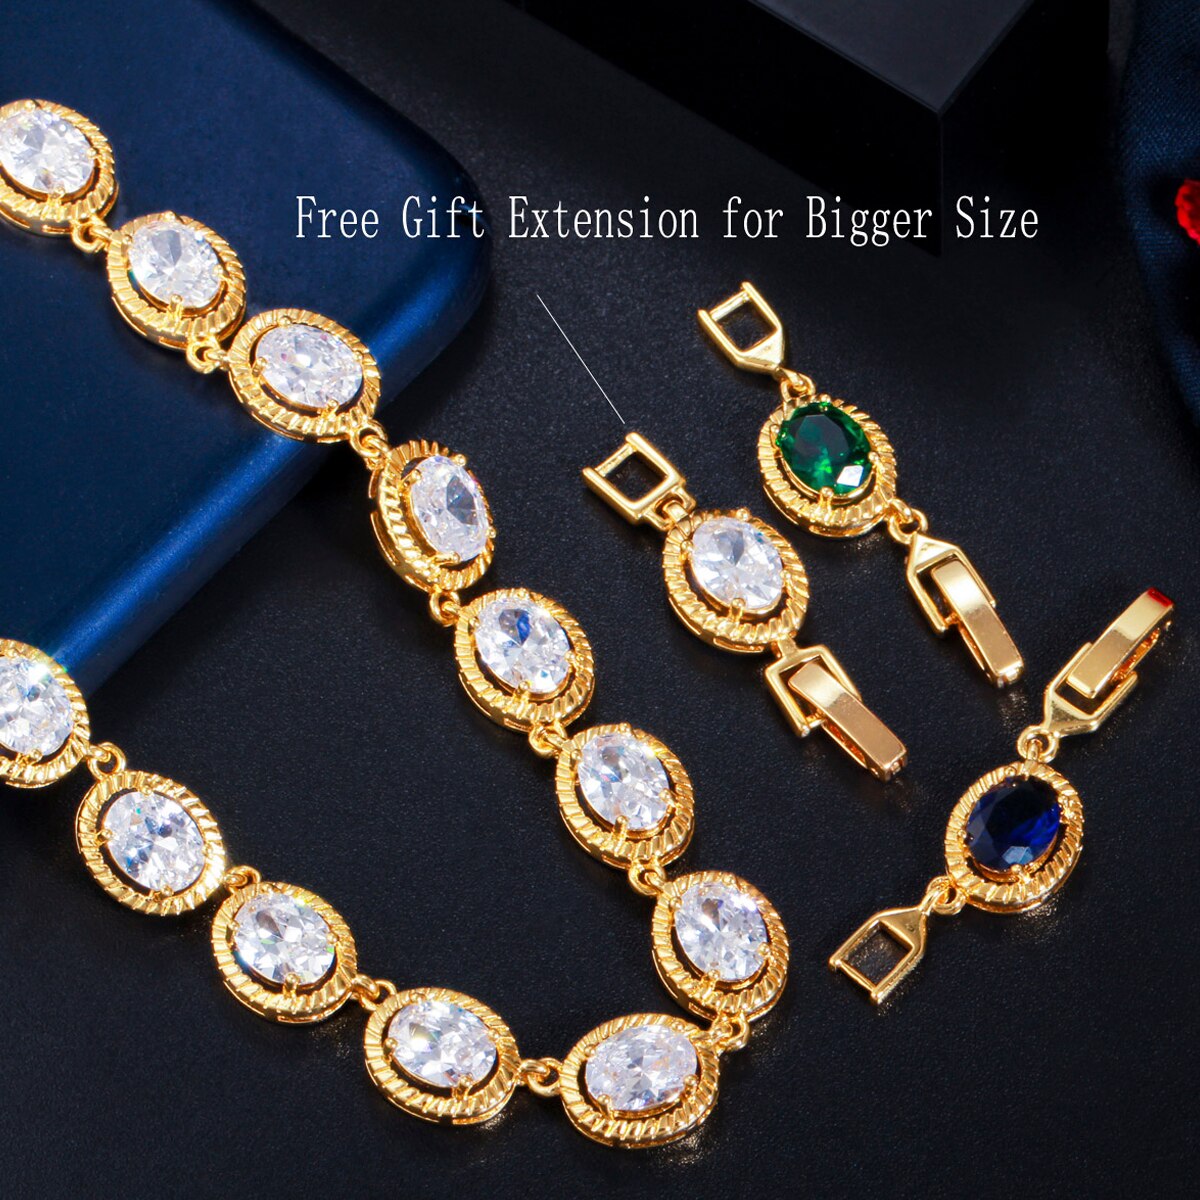 ThreeGraces-Gorgeous-Nigerian-Gold-Color-3pcs-White-Big-Round-CZ-Women-Wedding-Party-Necklace-Earrin-1005001603867521-5